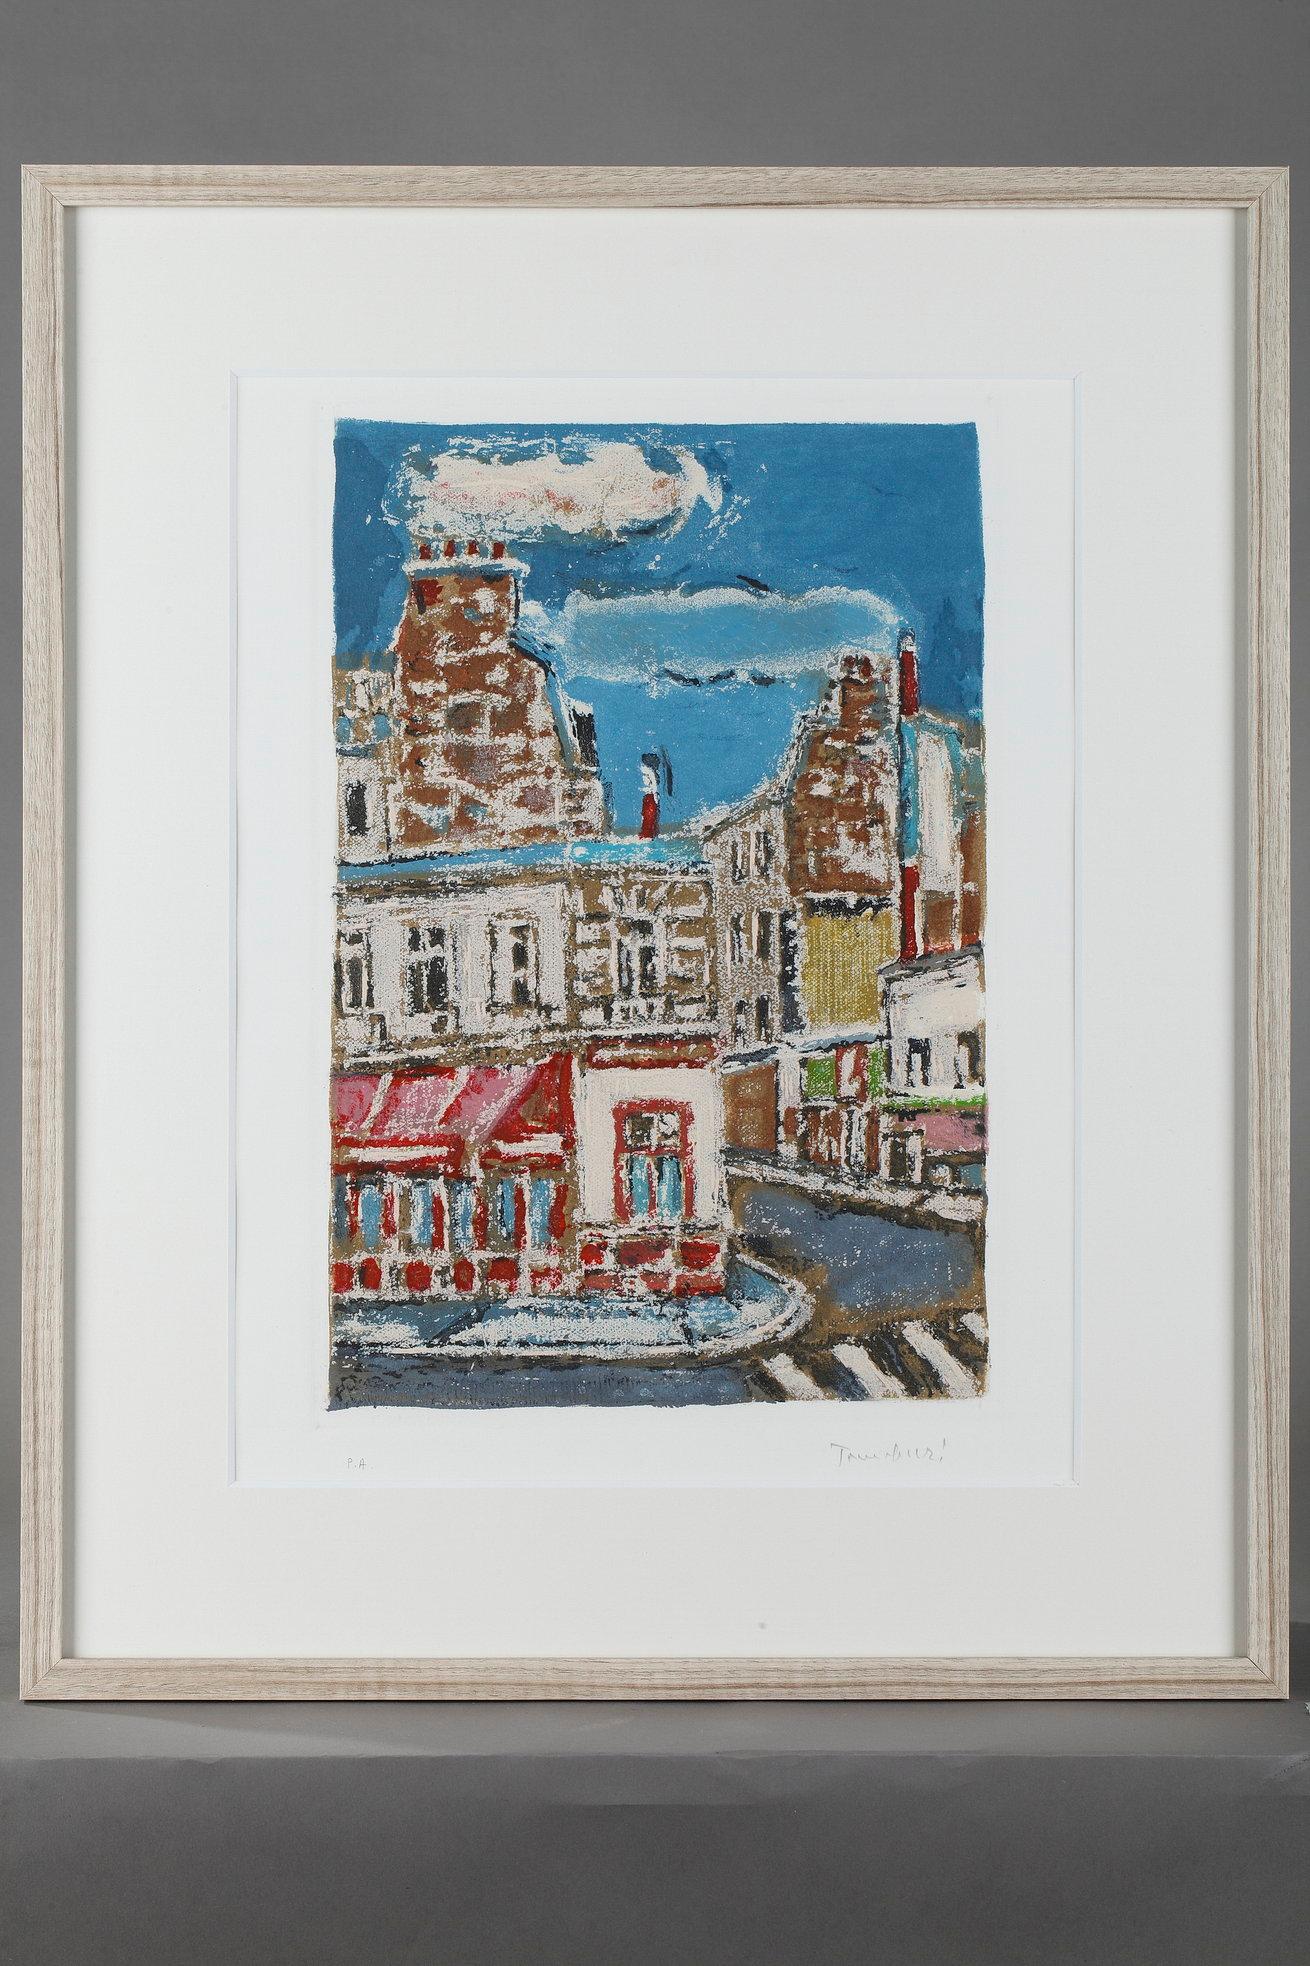 Group of four framed etchings by Orfeo Tamburini representing the districts of Paris realized with aquatint in colors. They were produced by the art print publishing house Il Cigno in Rome between 1979 and 1981 for the series 